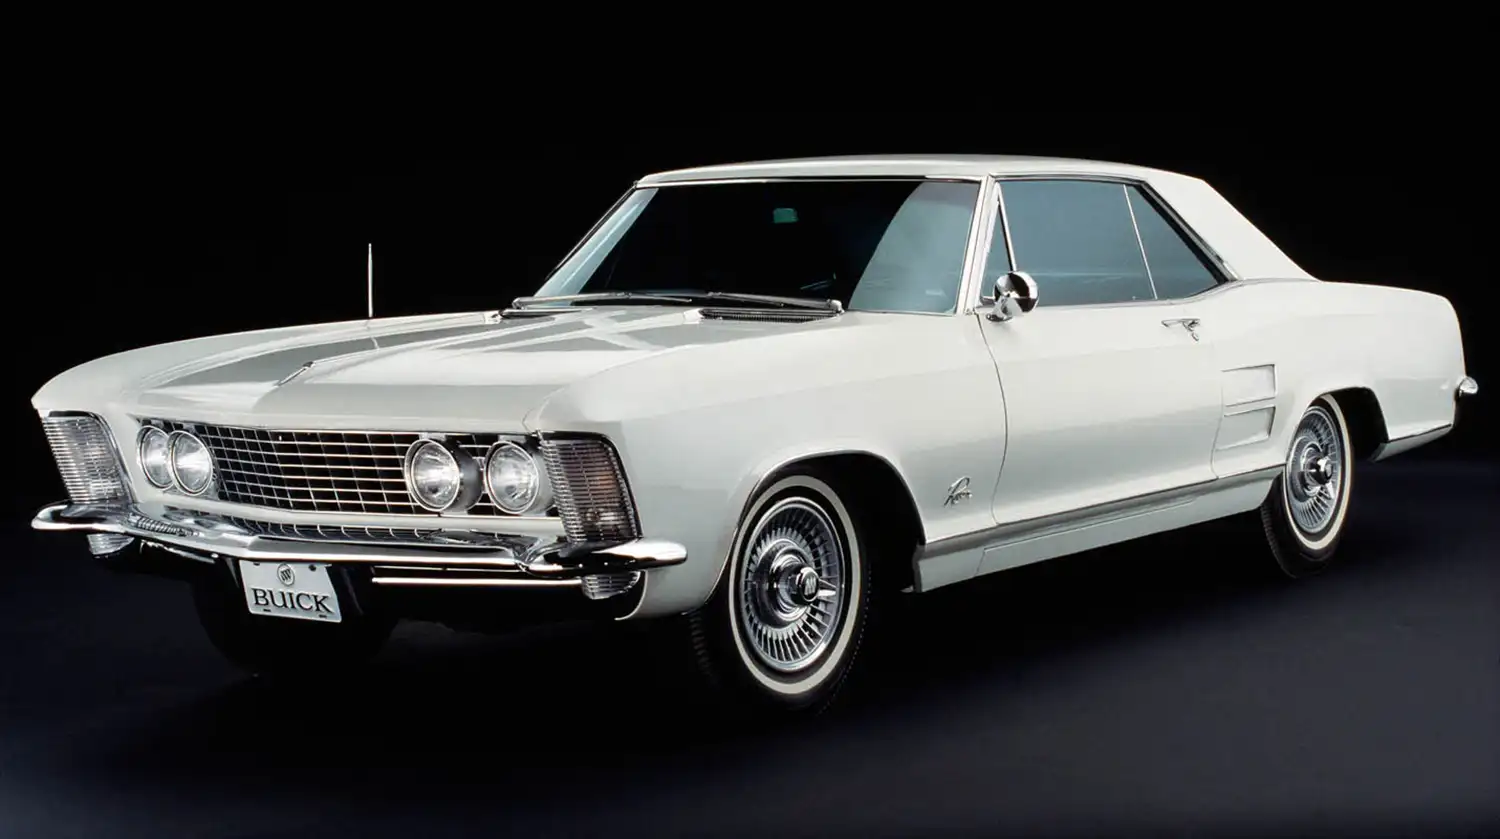 The 1963 Buick Riviera: A Timeless Icon of Automotive Elegance